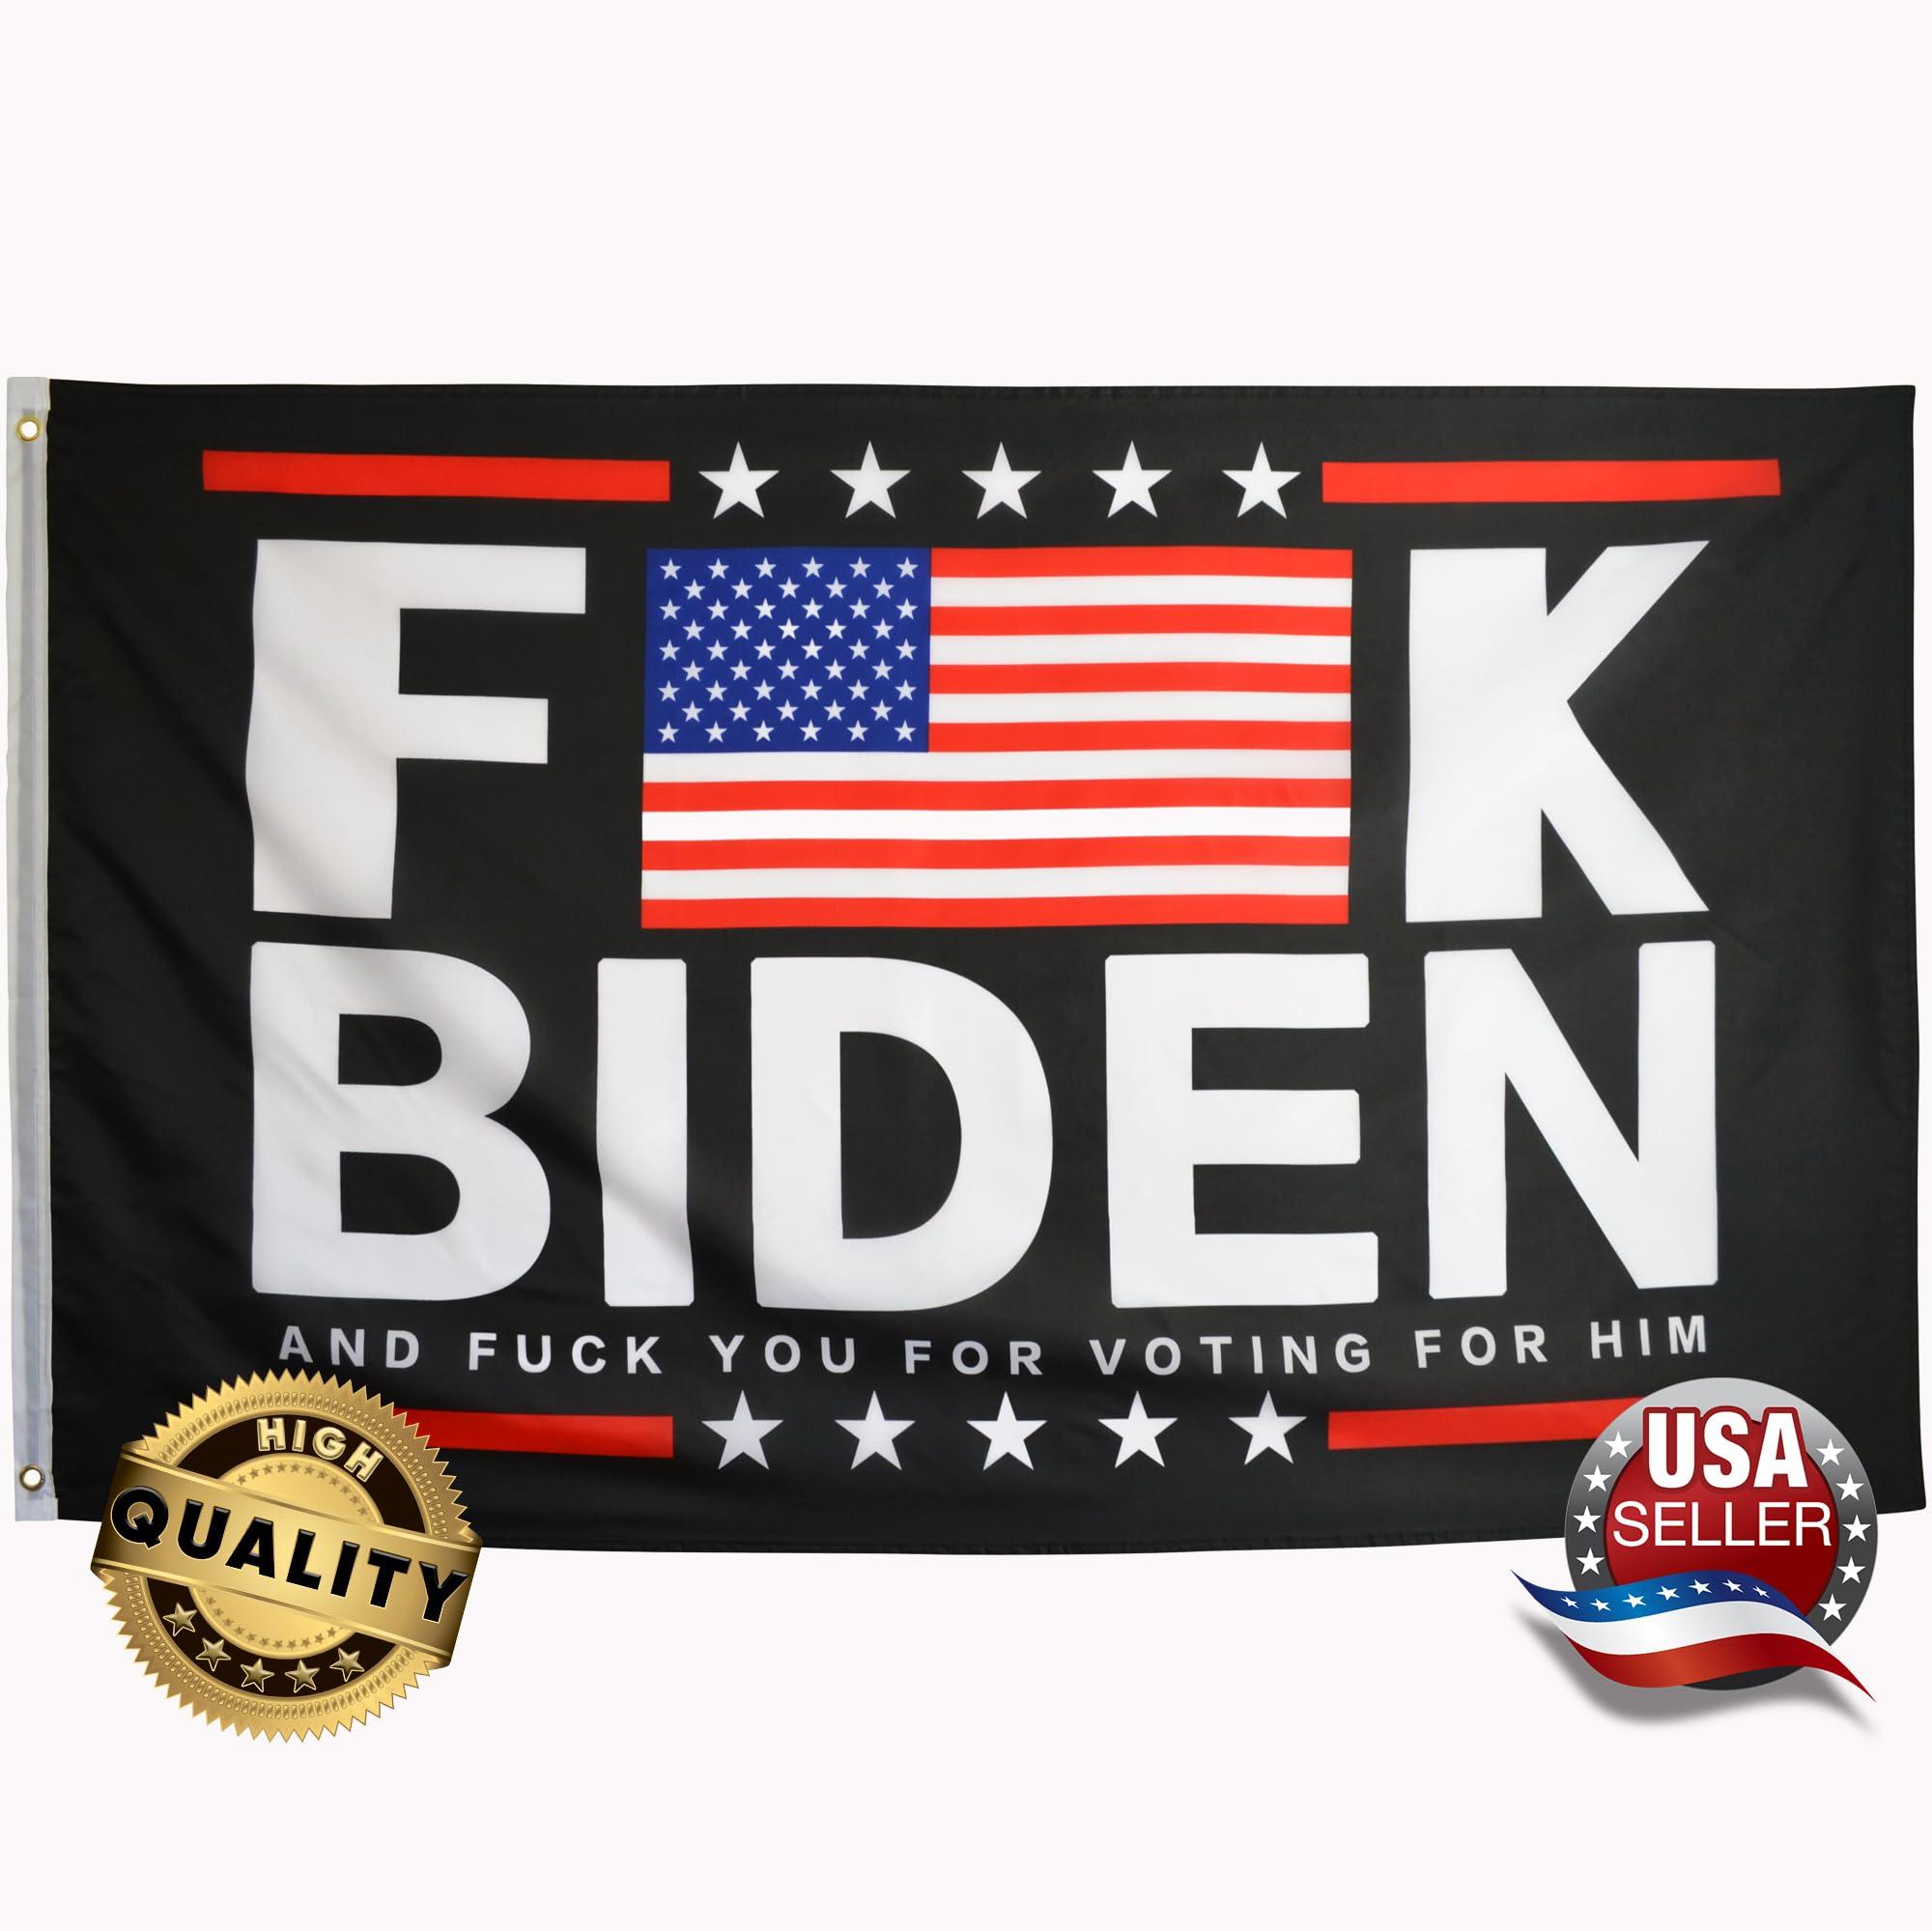 Amazon Eugenys Fuck Biden Flag Foot You For Voting